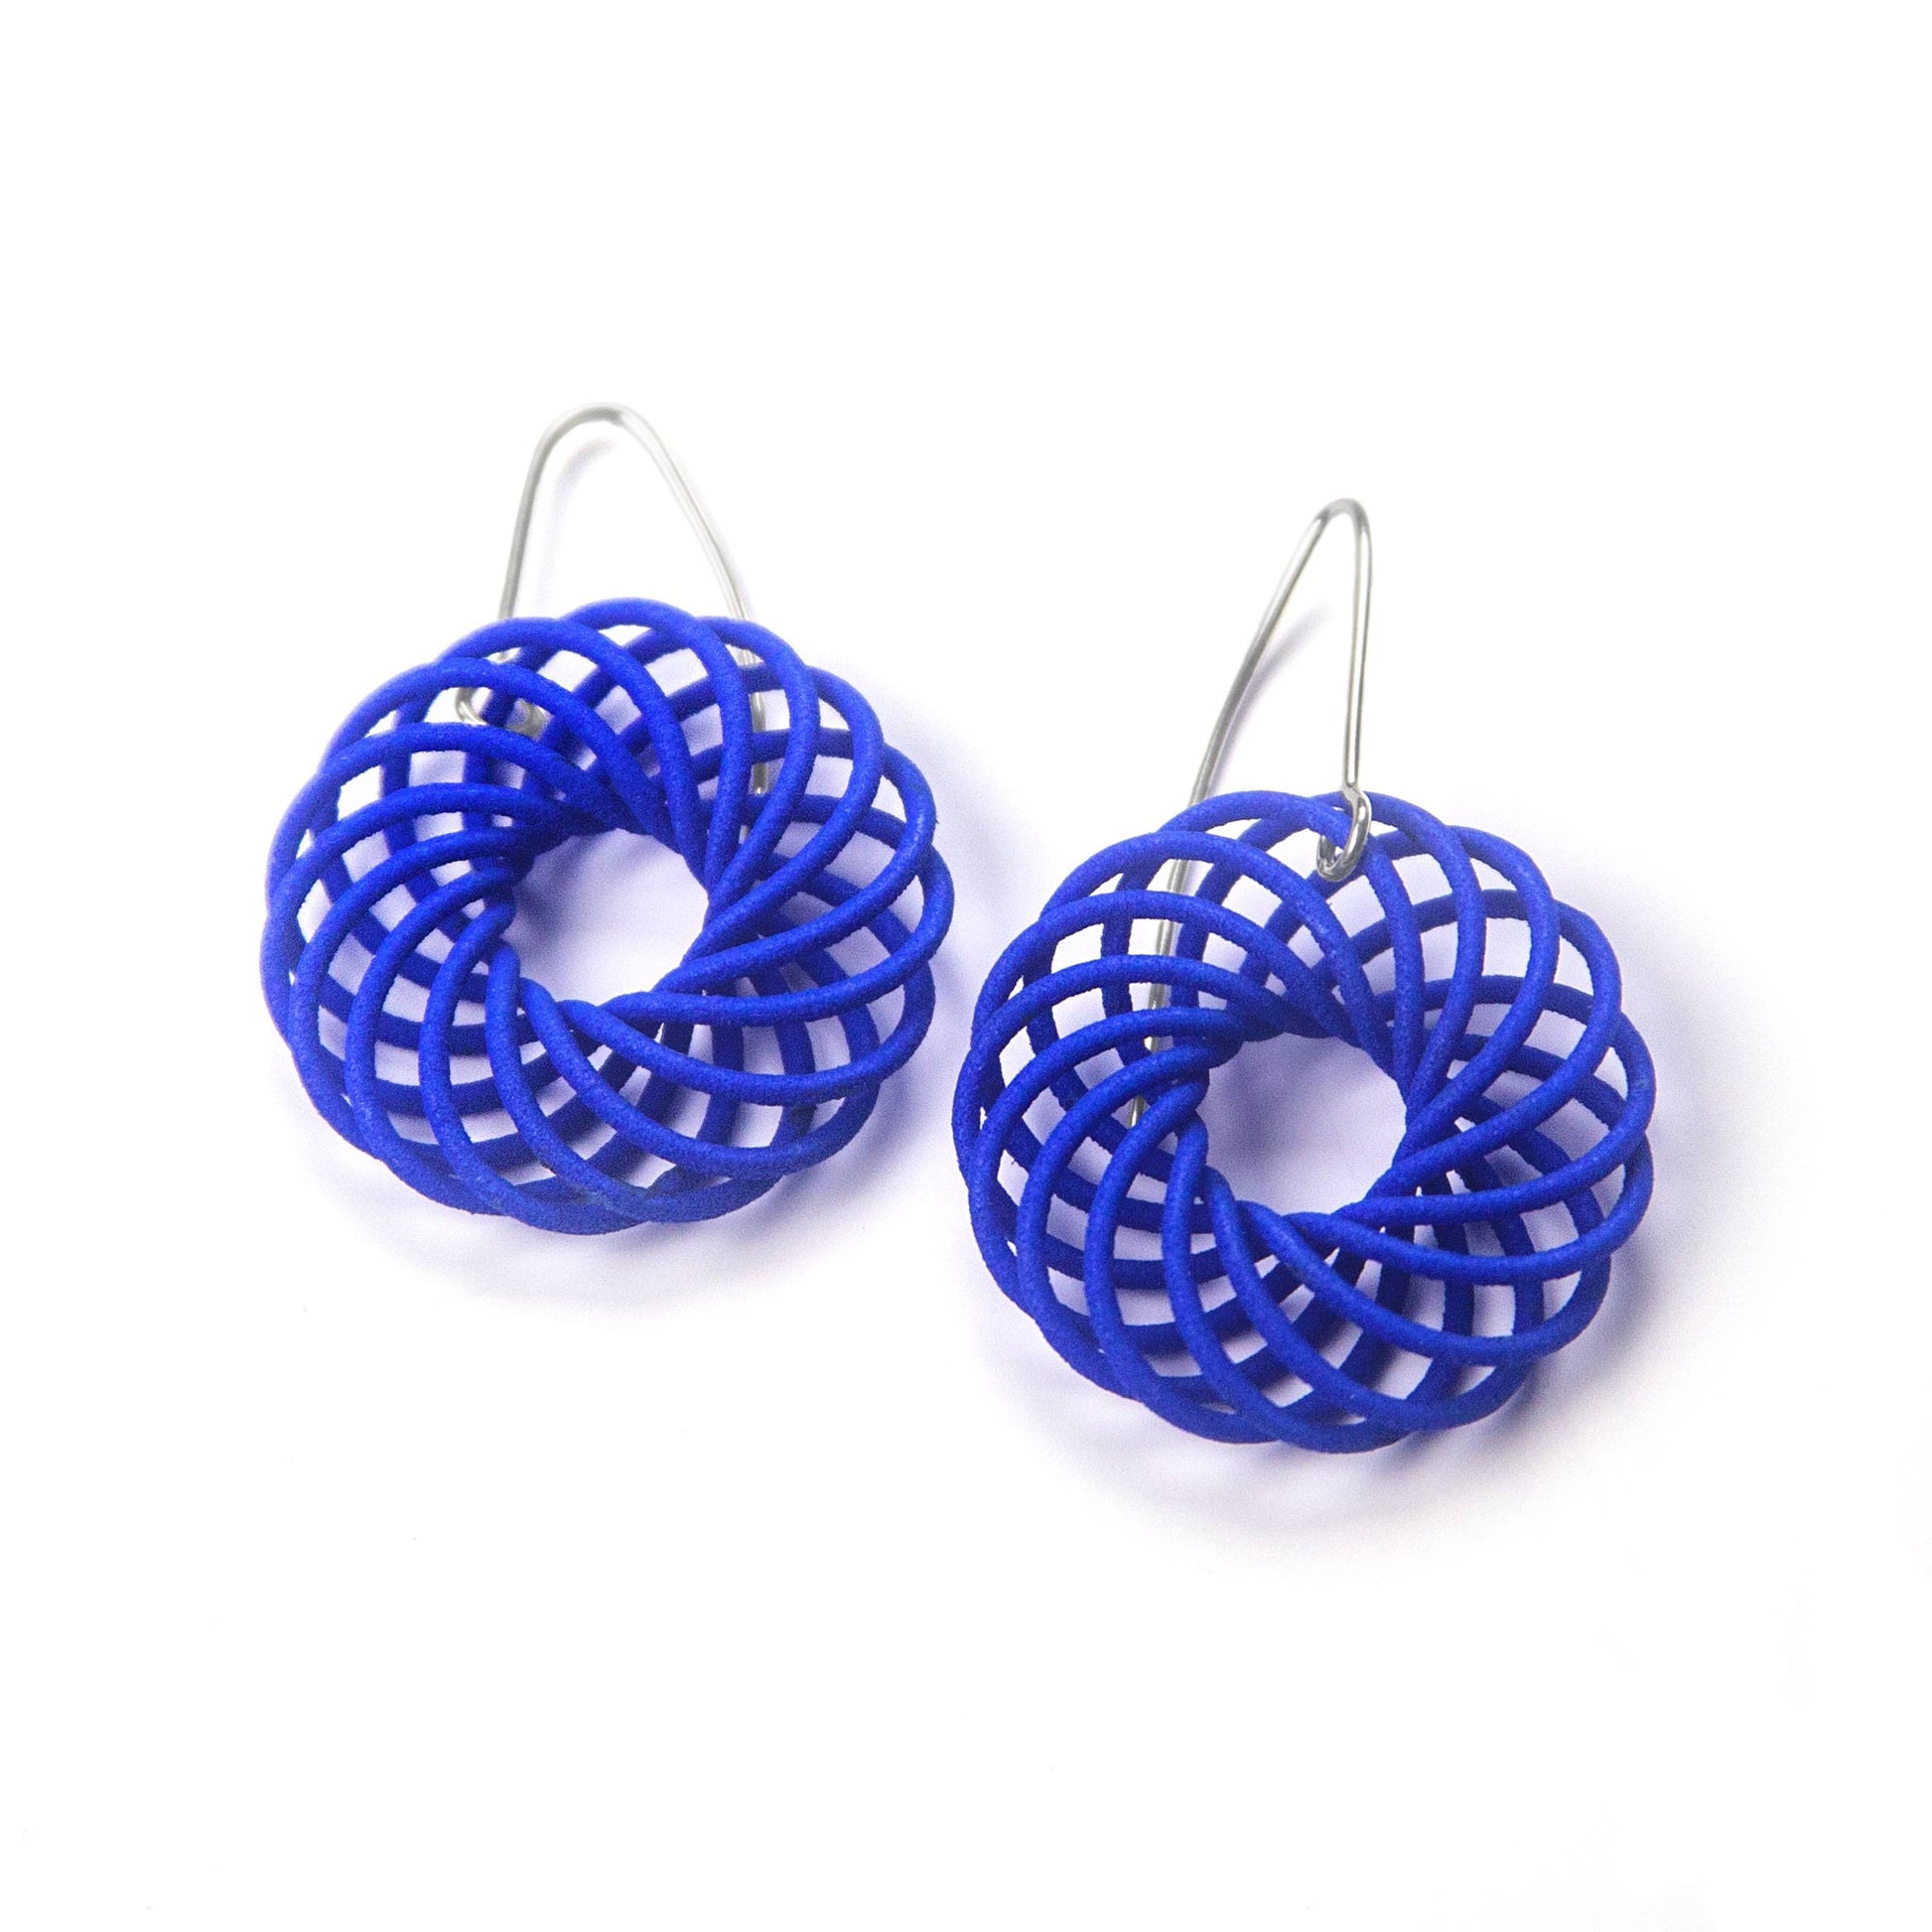 Small blue Vortex 3D printed nylon earrings by Katy Luxton